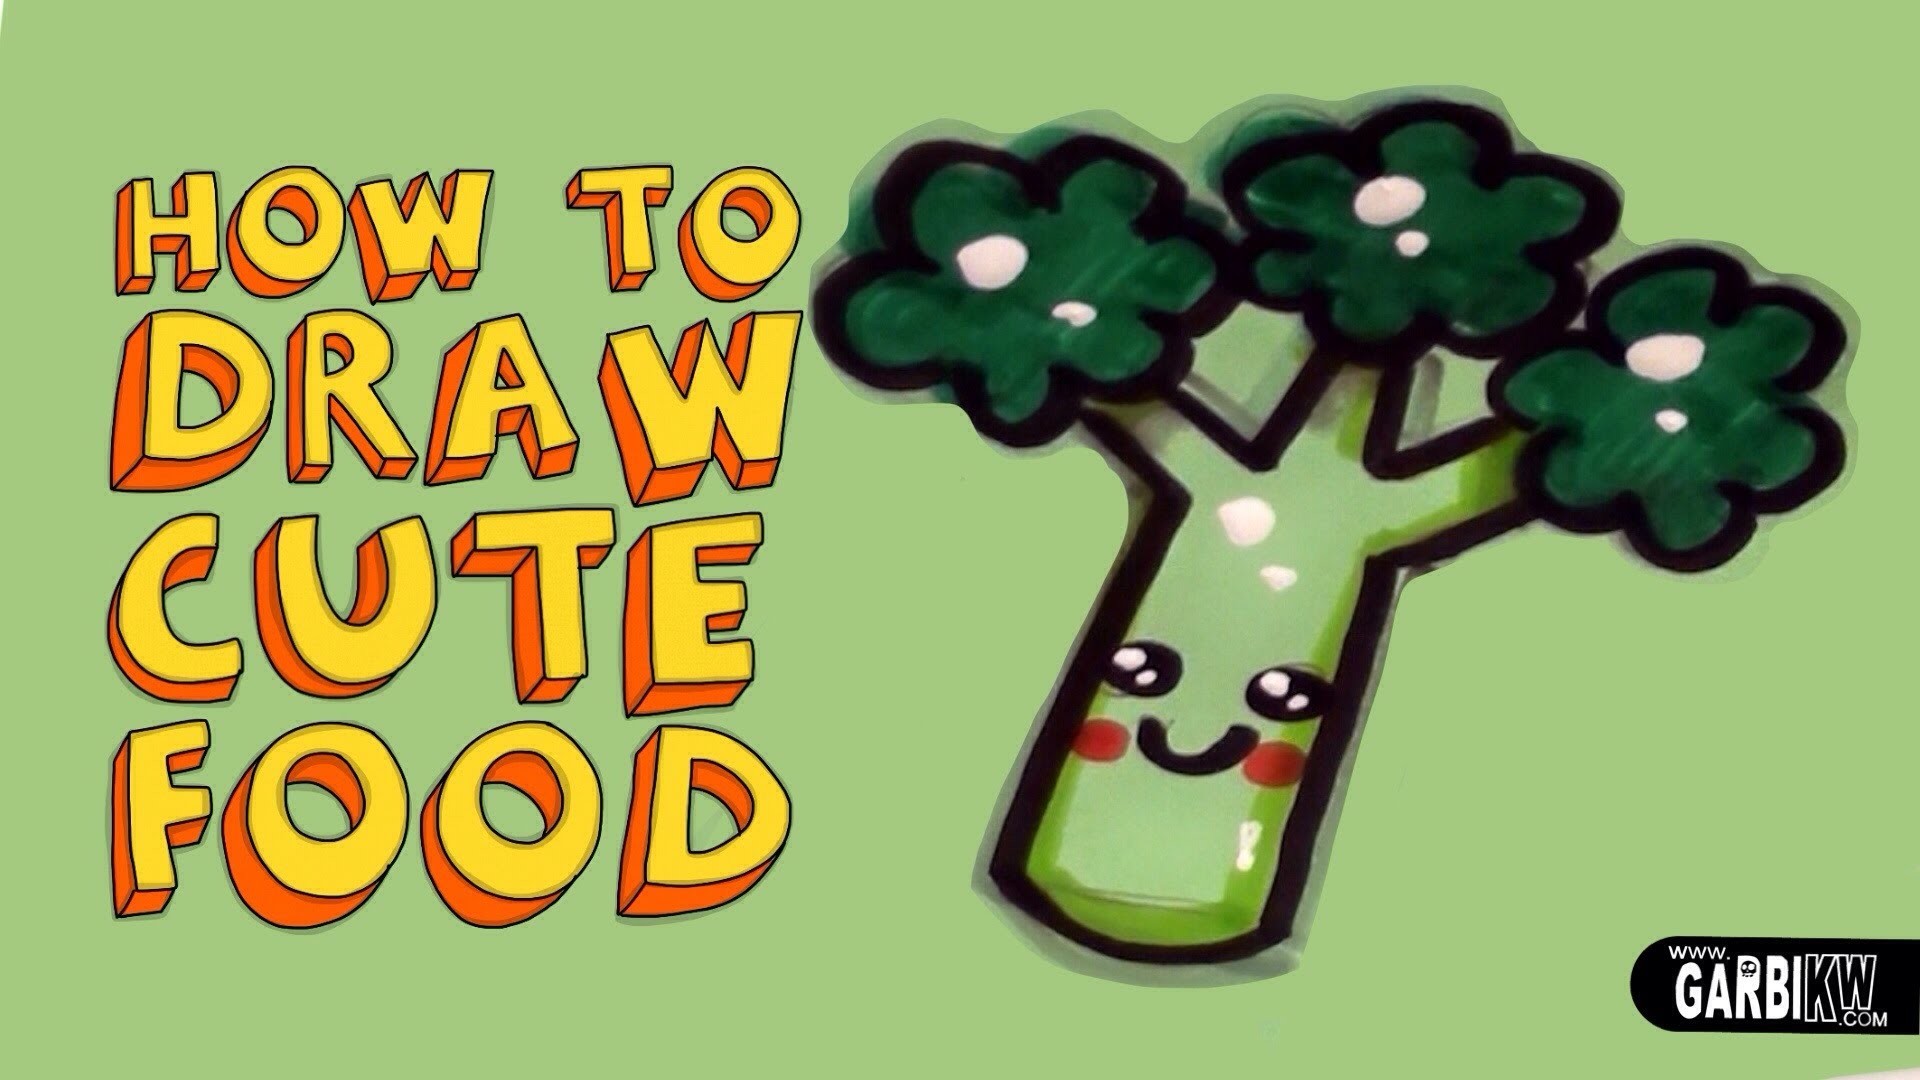 1920x1080 How To Draw a Cute Broccoli - Kawaii Food - Easy Drawings by Garbi KW -  YouTube